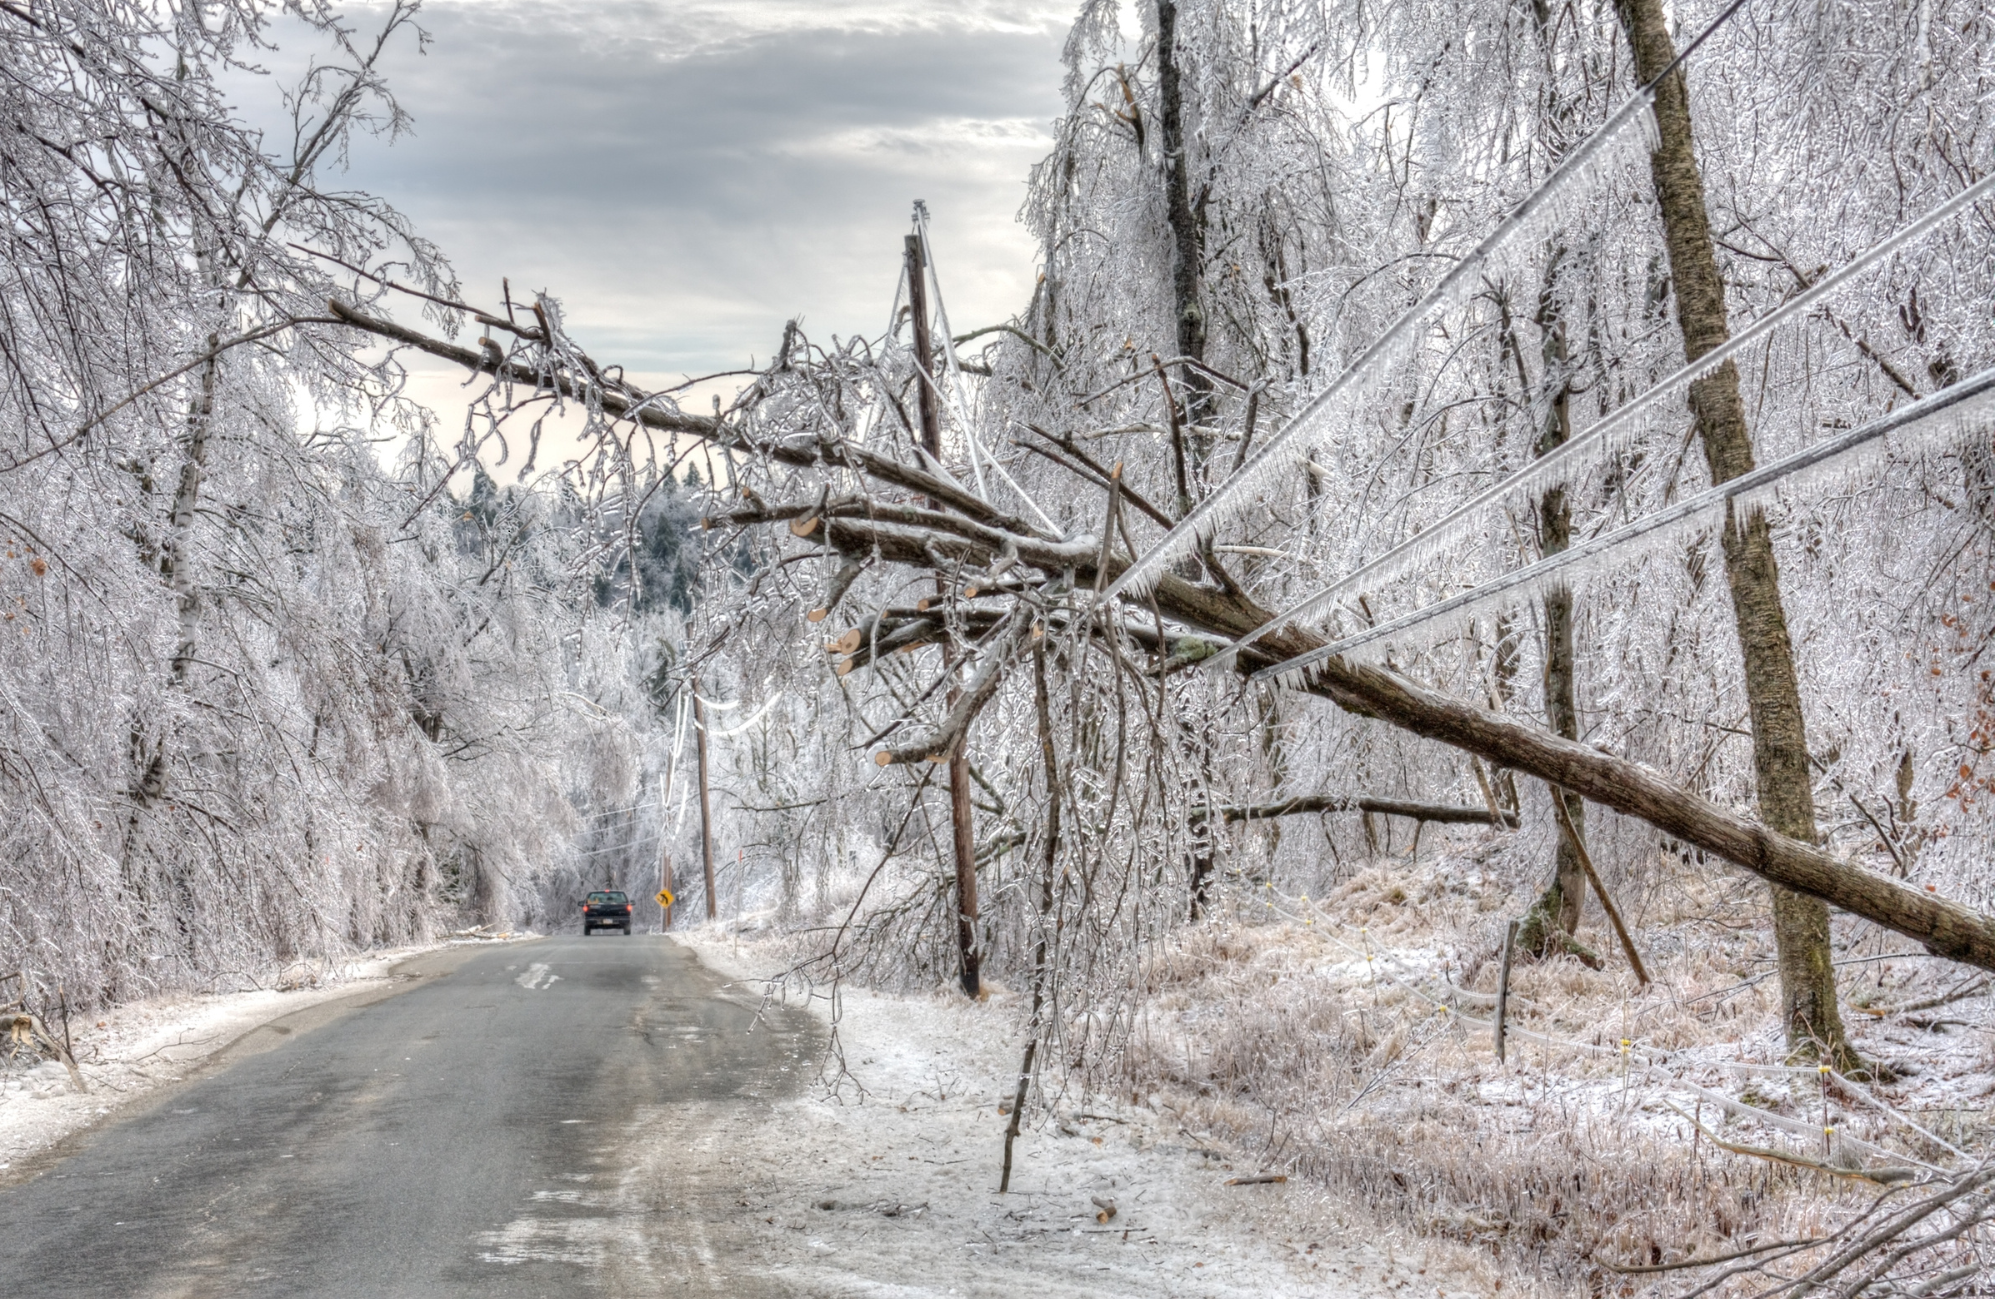 A winter storm knocked a tree down into a power line which hangs over an icy road